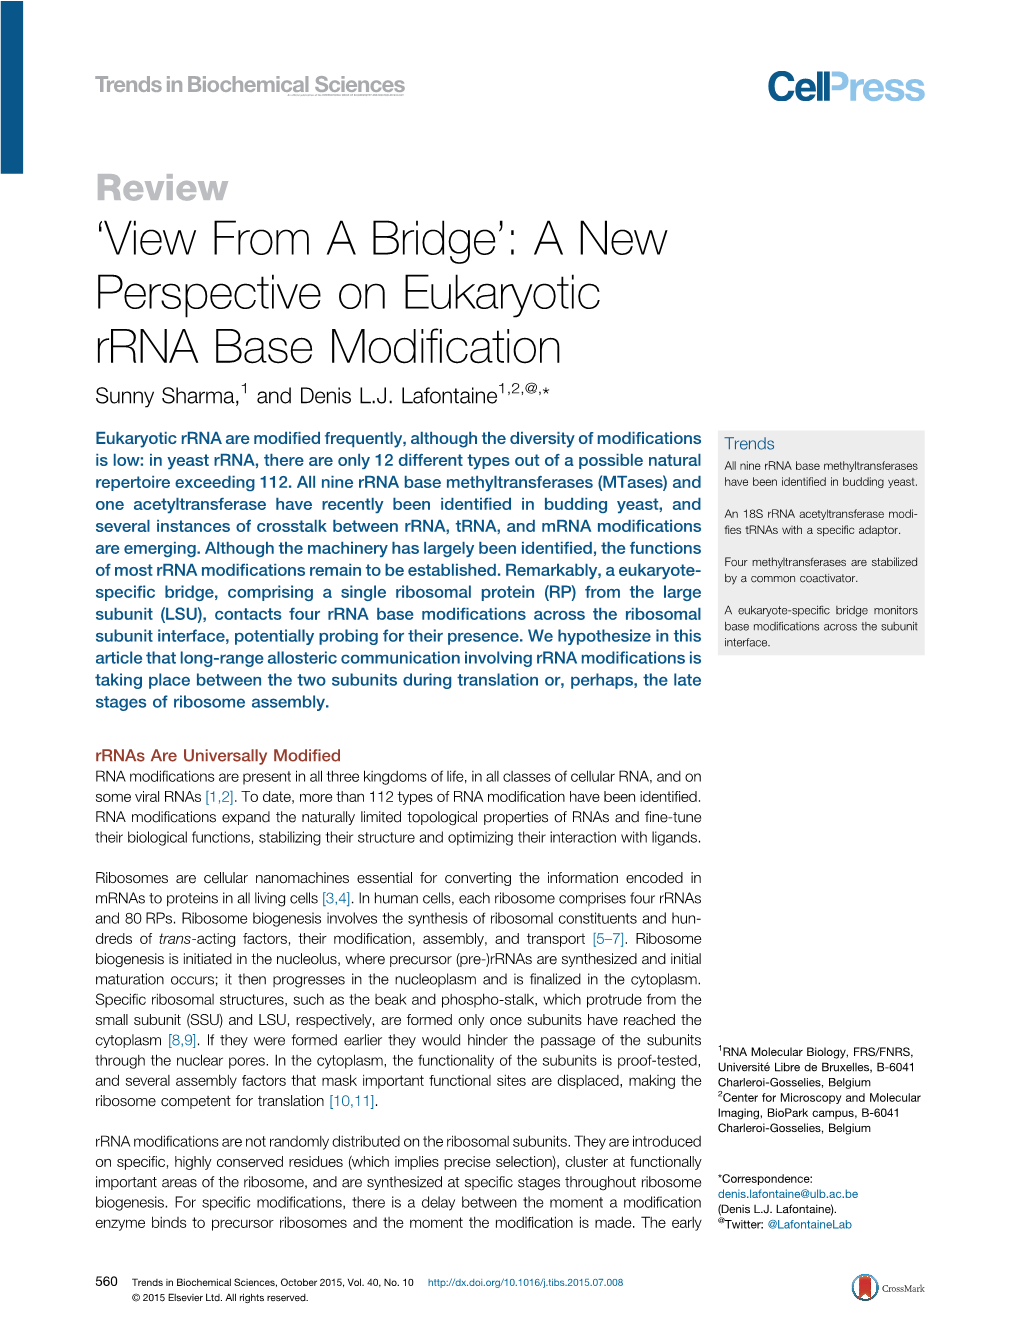 A New Perspective on Eukaryotic Rrna Base Modification